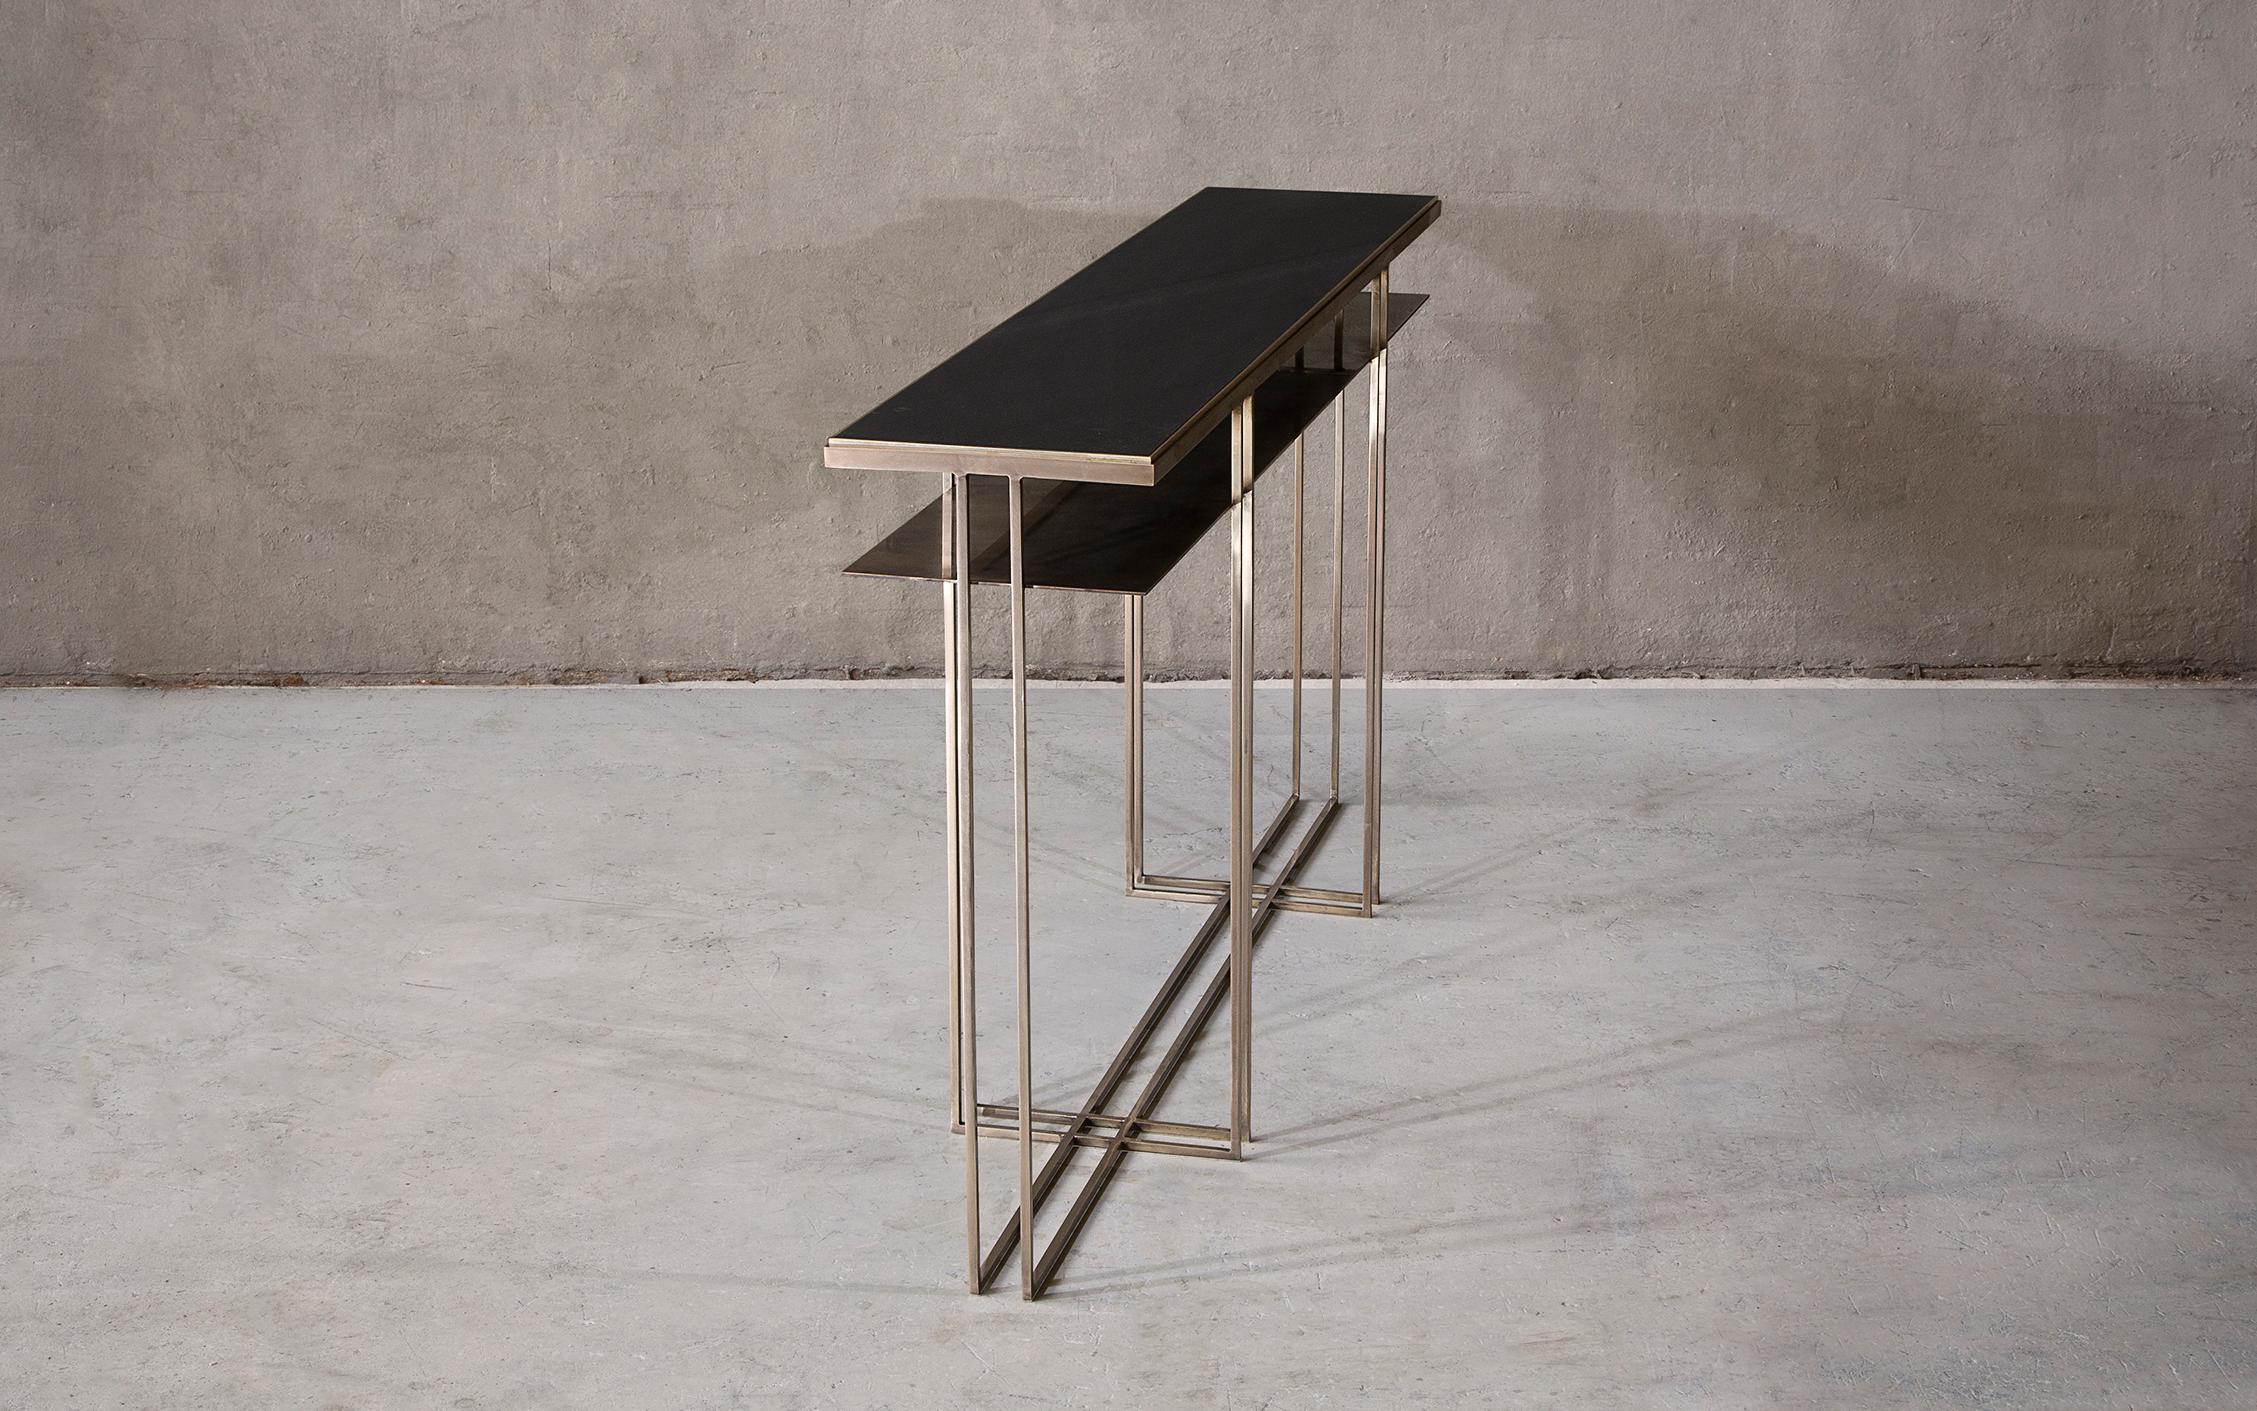 A console table in patinated brass and honed Cumbrian slate. Handcrafted to order in the North East England. Custom sizes and finishes are available.

Measures: 180cm (length) x 35cm (width) x 80cm (height). 
Custom sizes available.

Made to order